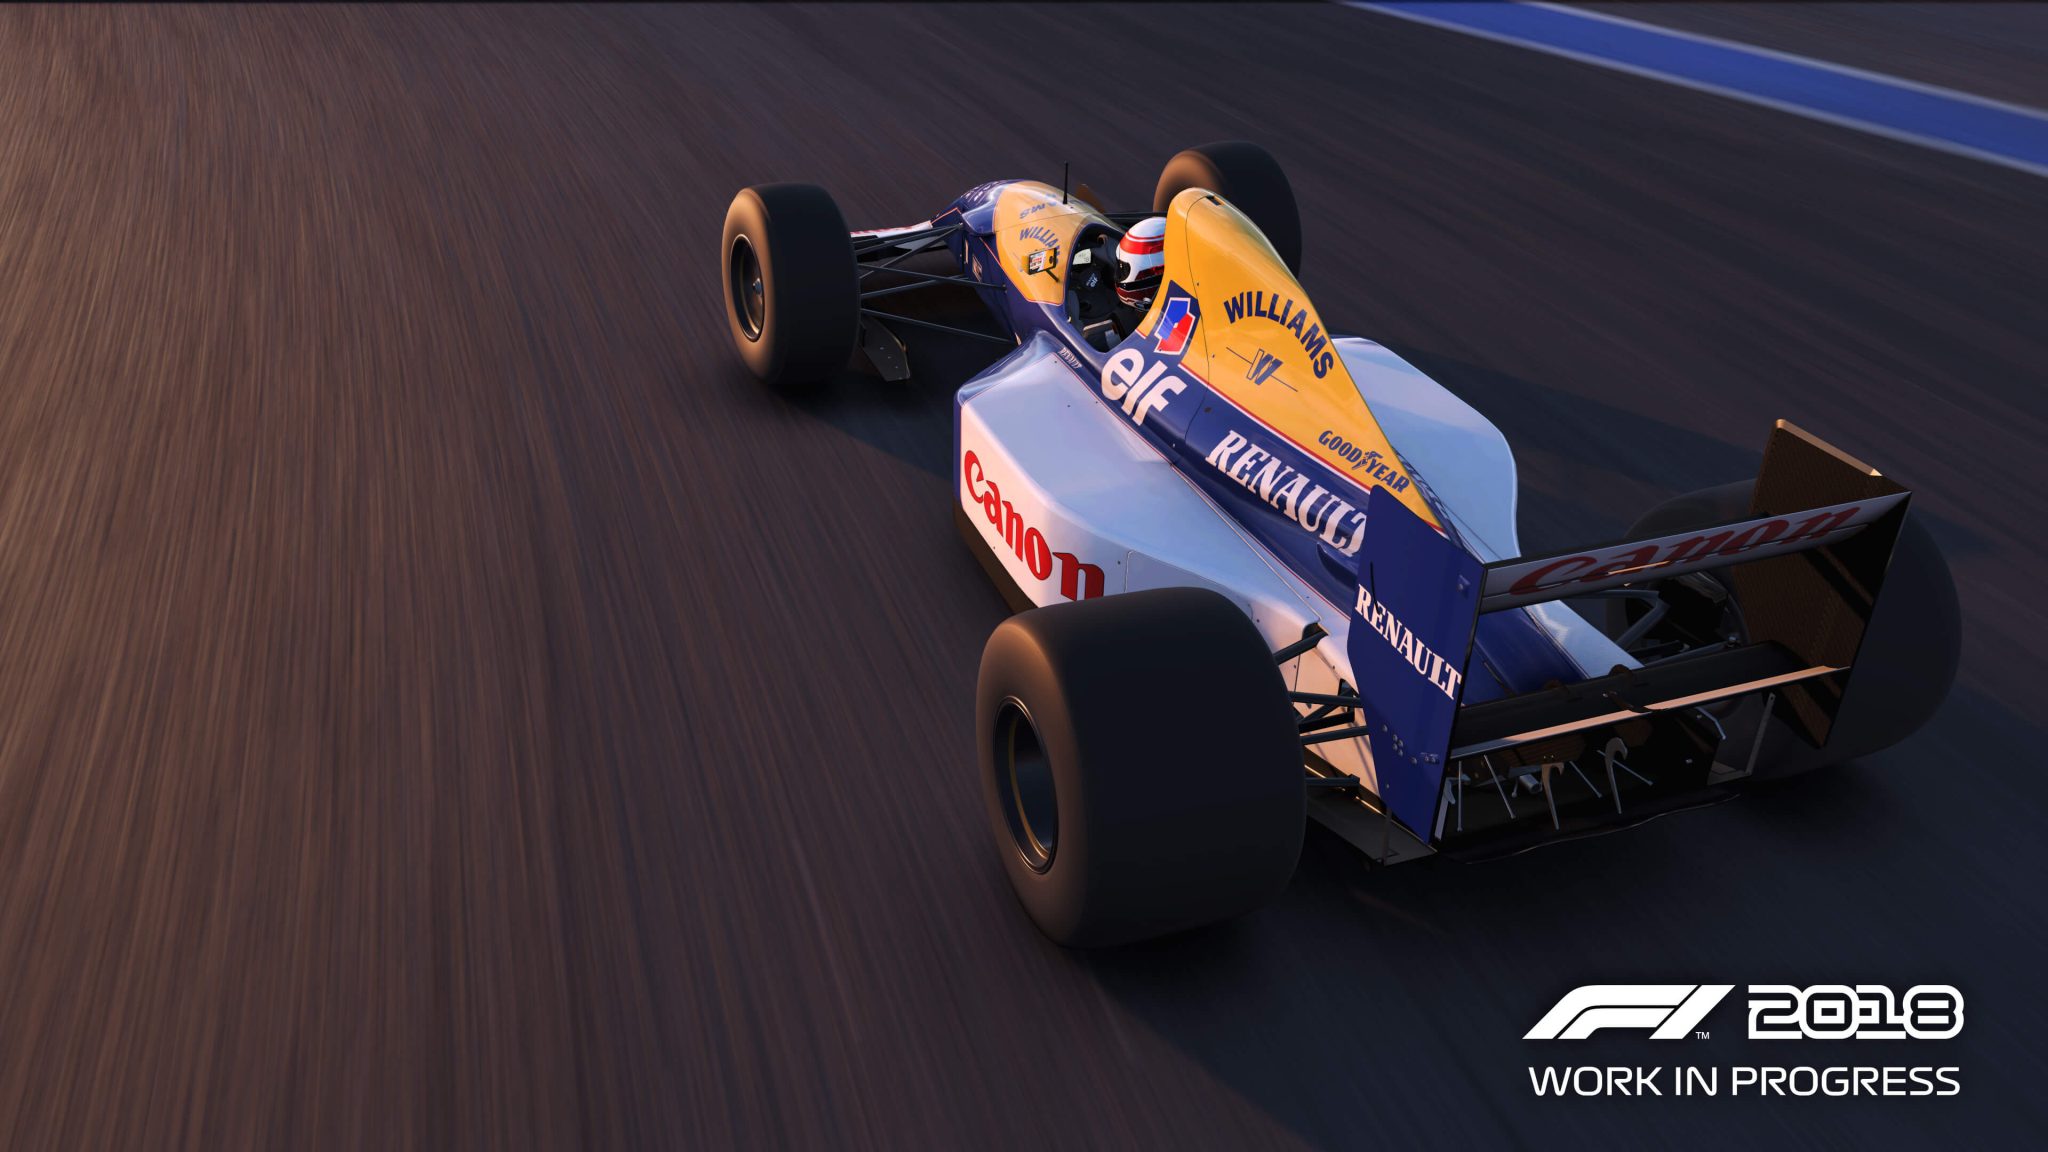 F1 2018 - Análise / Review